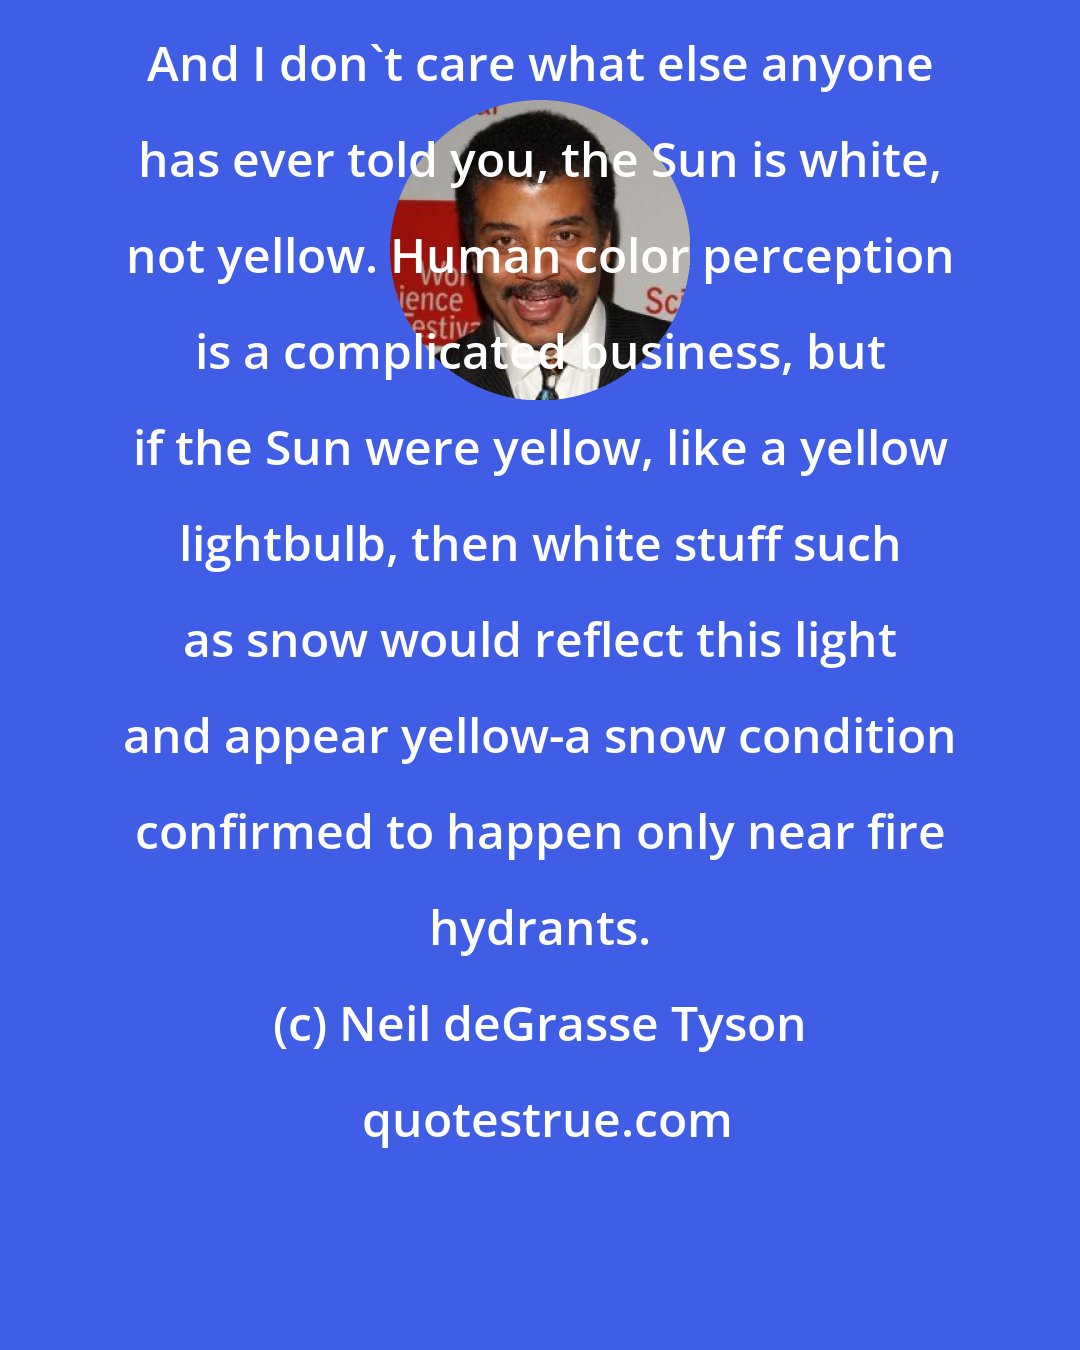 Neil deGrasse Tyson: And I don't care what else anyone has ever told you, the Sun is white, not yellow. Human color perception is a complicated business, but if the Sun were yellow, like a yellow lightbulb, then white stuff such as snow would reflect this light and appear yellow-a snow condition confirmed to happen only near fire hydrants.